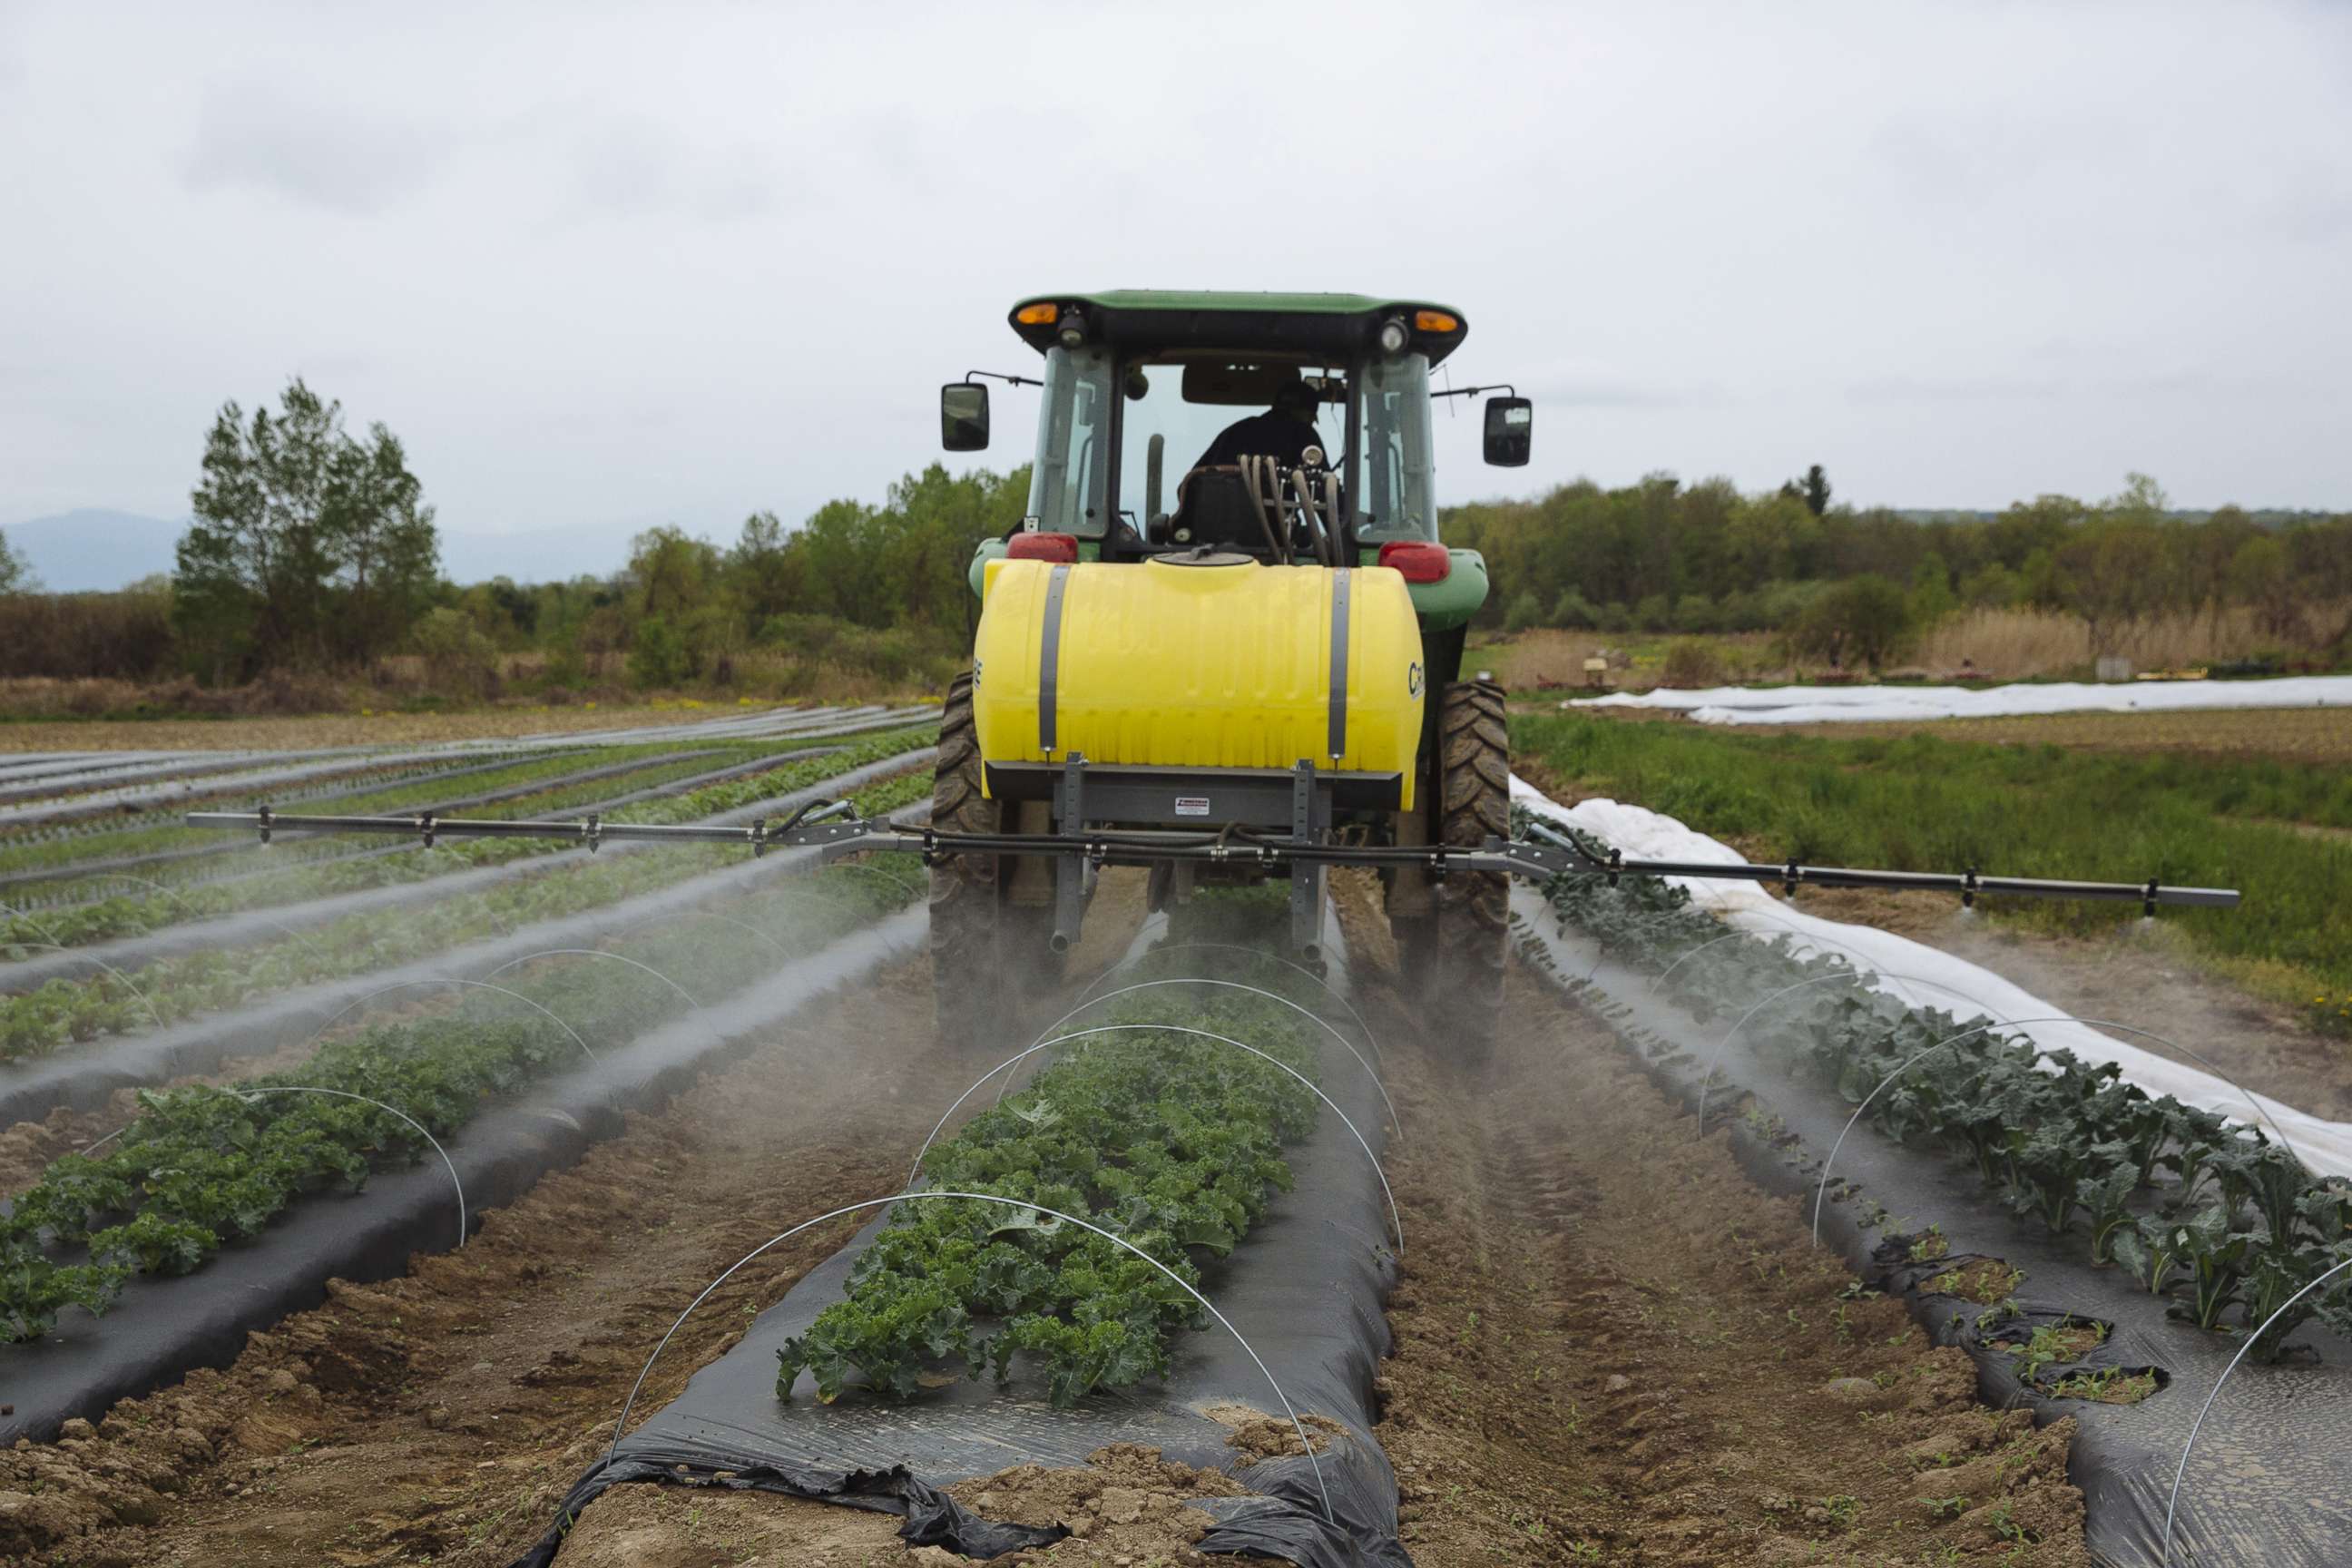 PHOTO: A worker rides a tractor while spraying organic pesticide on crops at a farm in Hudson, N.Y., May 18, 2020. 